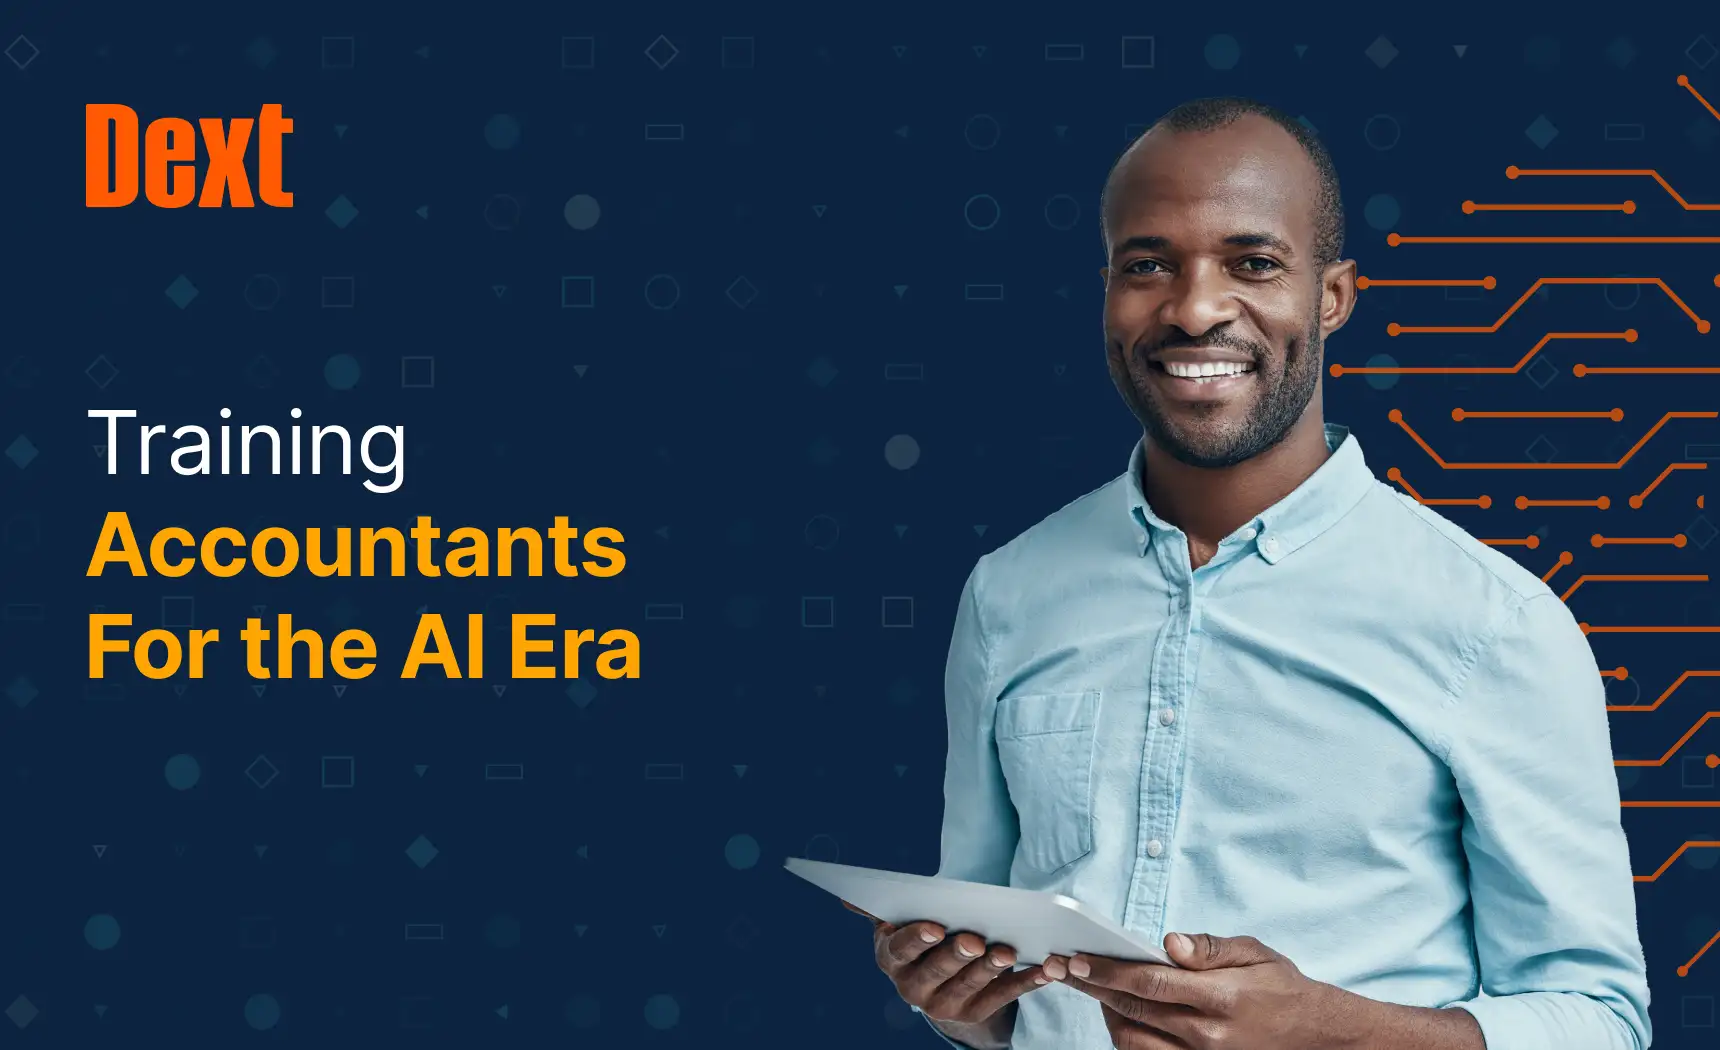 Training Accountants For the AI Era by Dext image